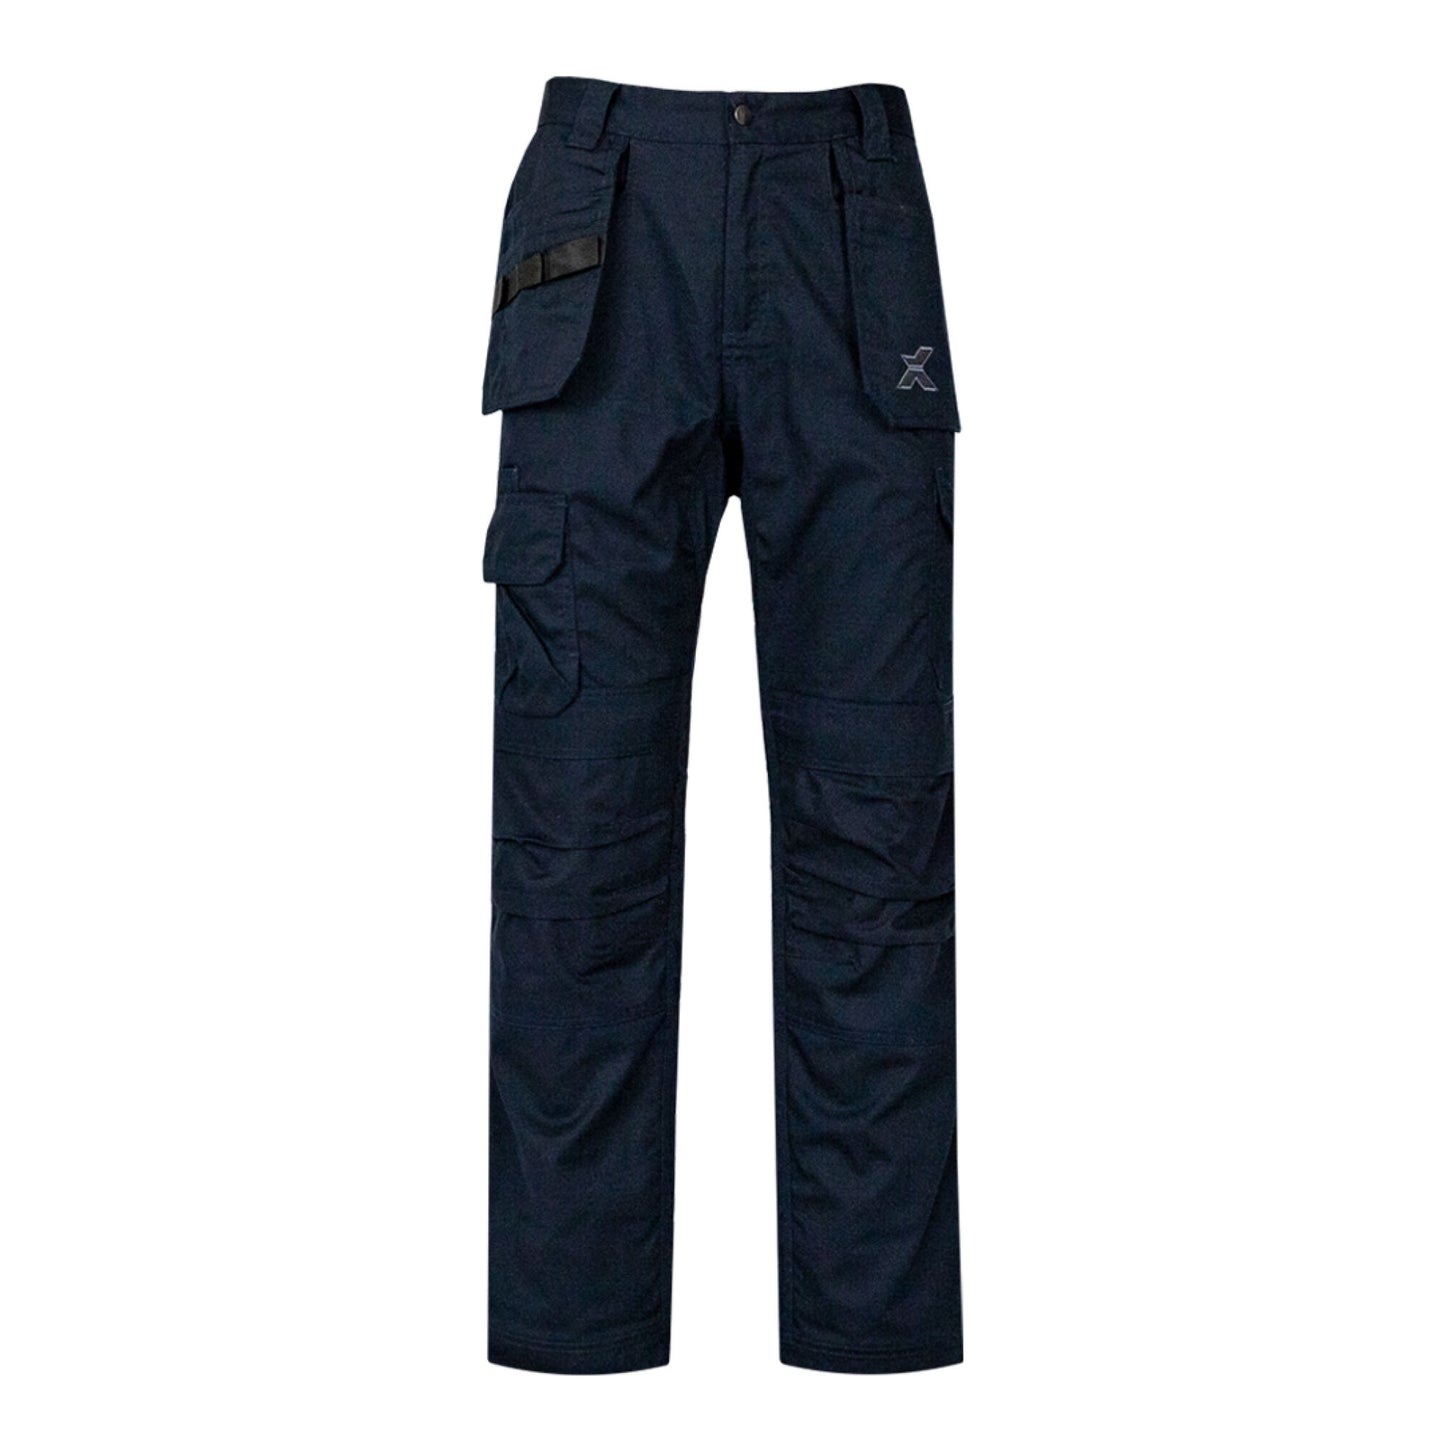 Xpert Core Work Trousers - Navy